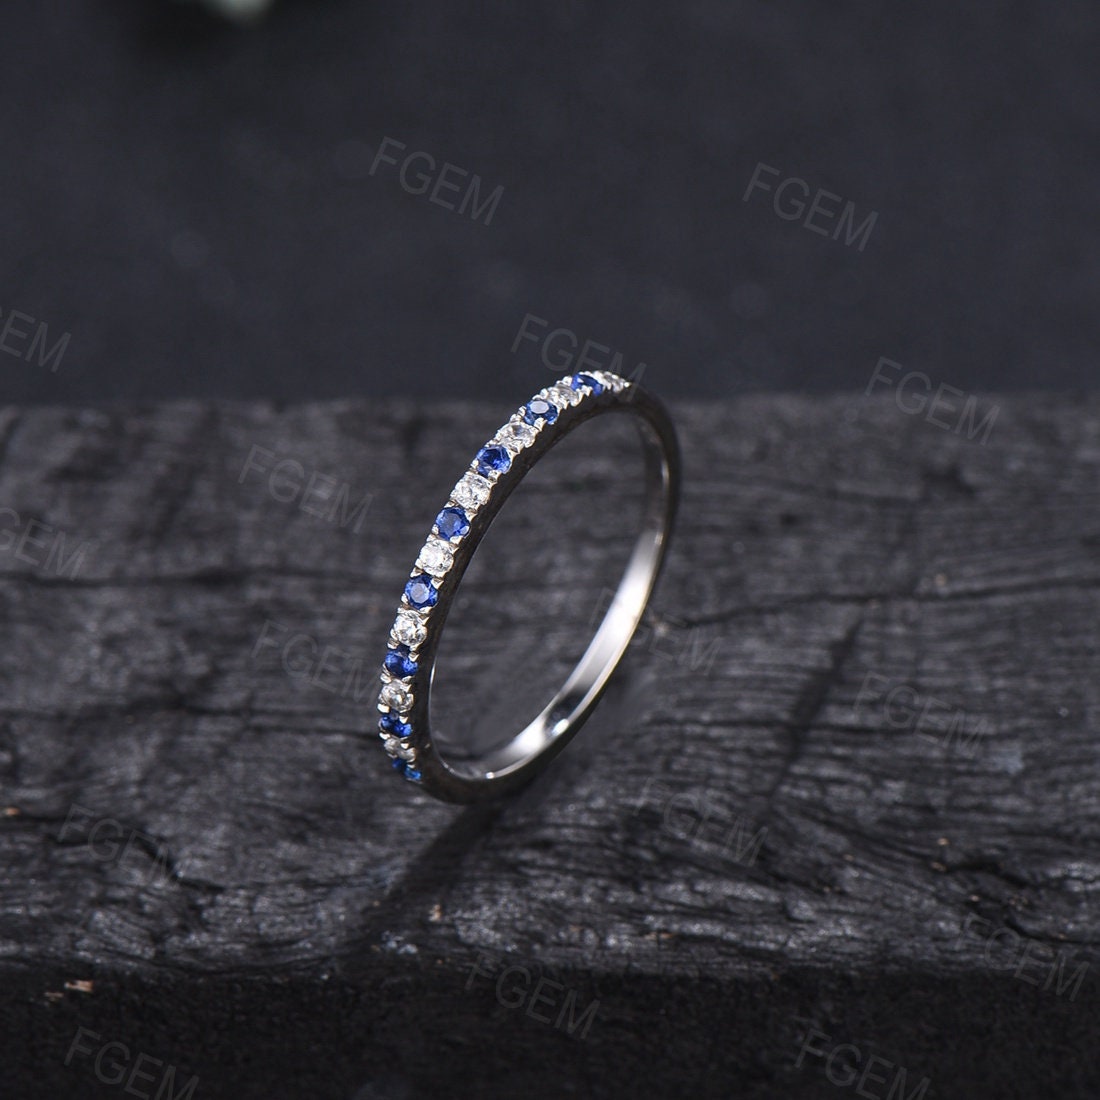 Natural Blue Sapphire Half Eternity Wedding Band Dainty Stackable Rings September Birthstone Gift Simple Minimalist Jewelry Anniversary Ring